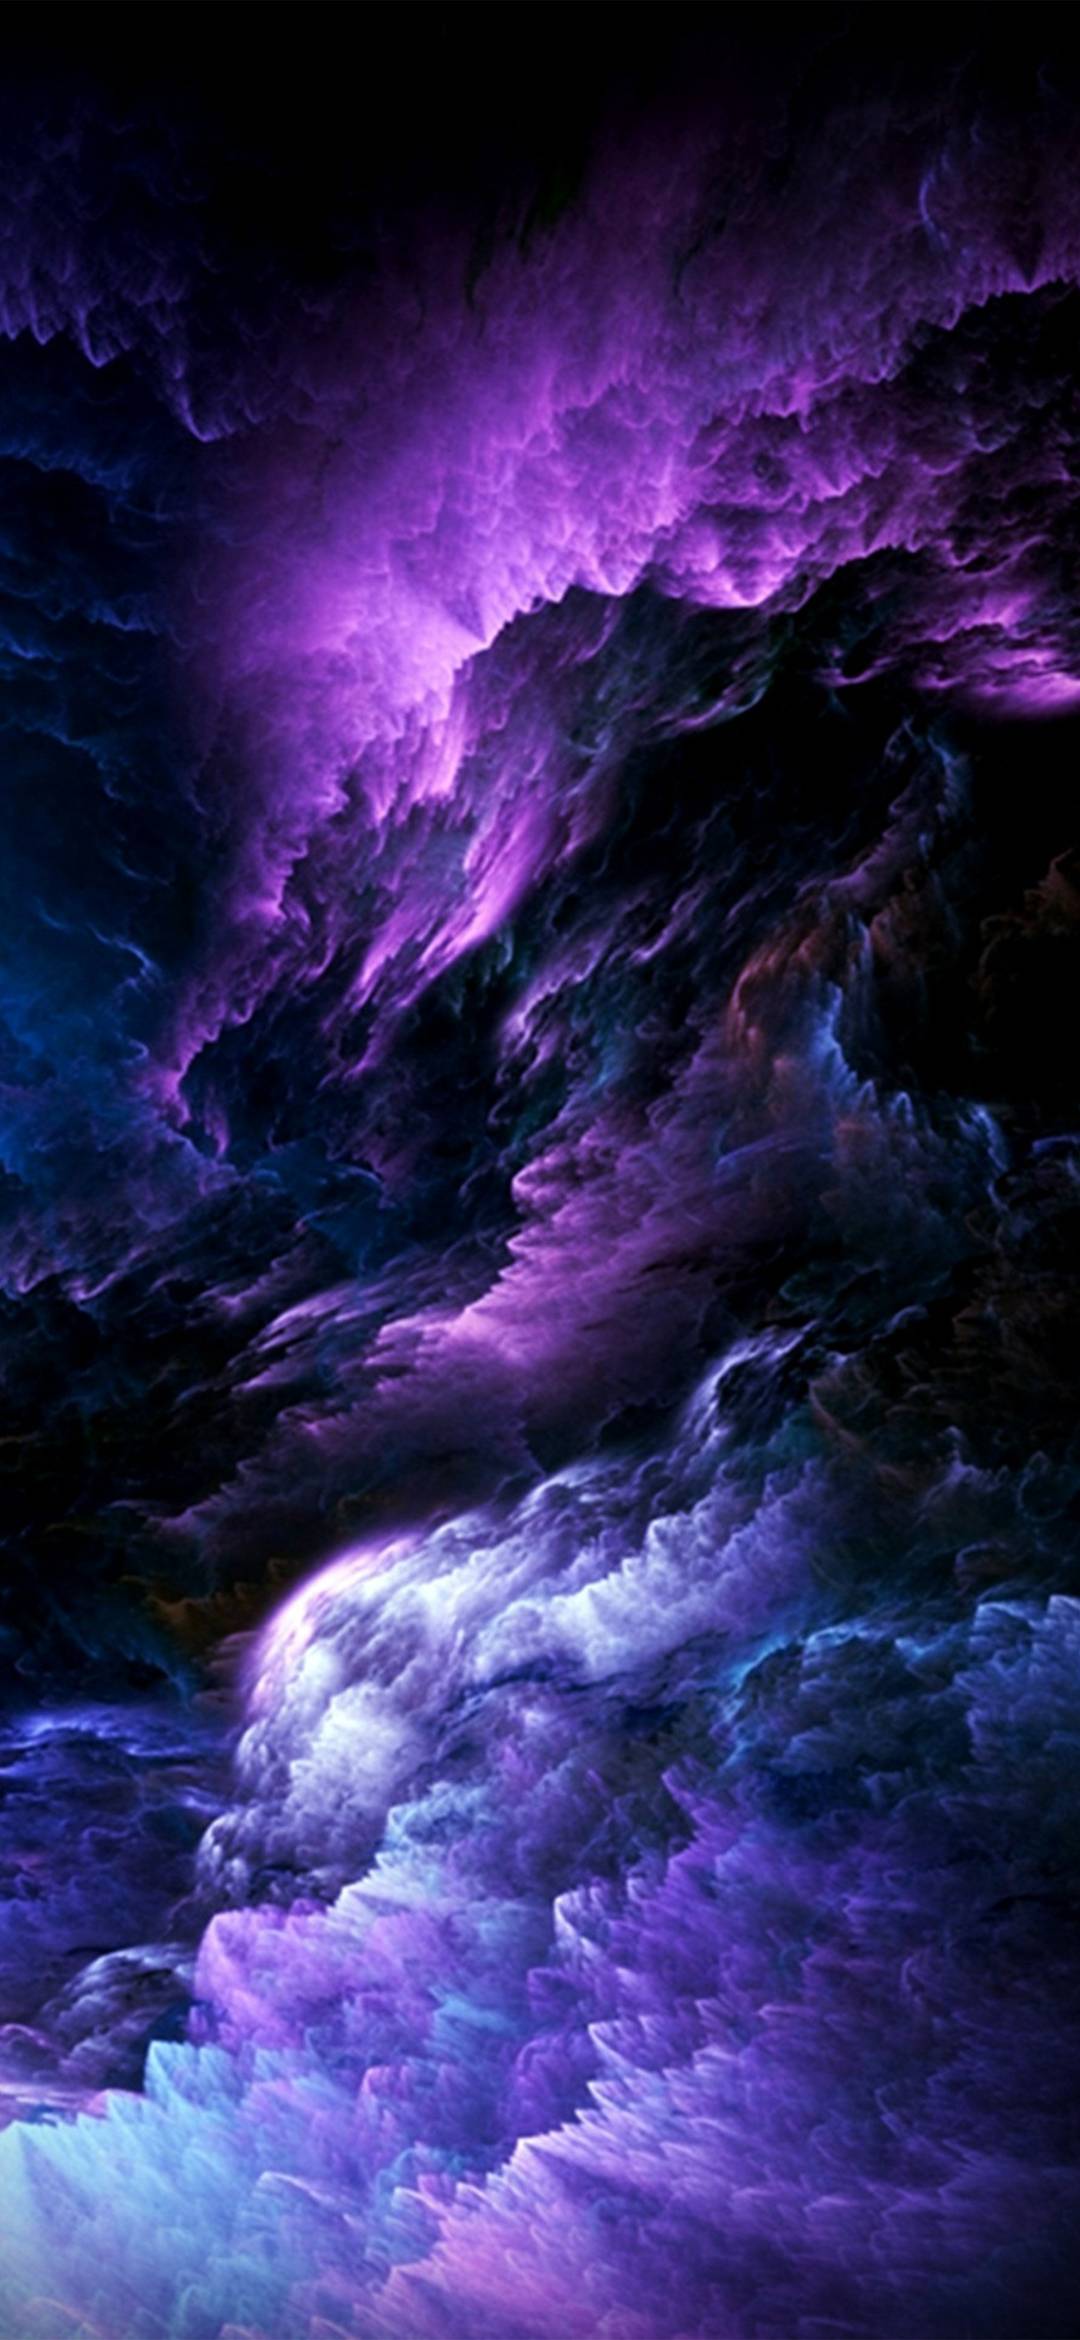 Space Wallpaper for Phone- 001